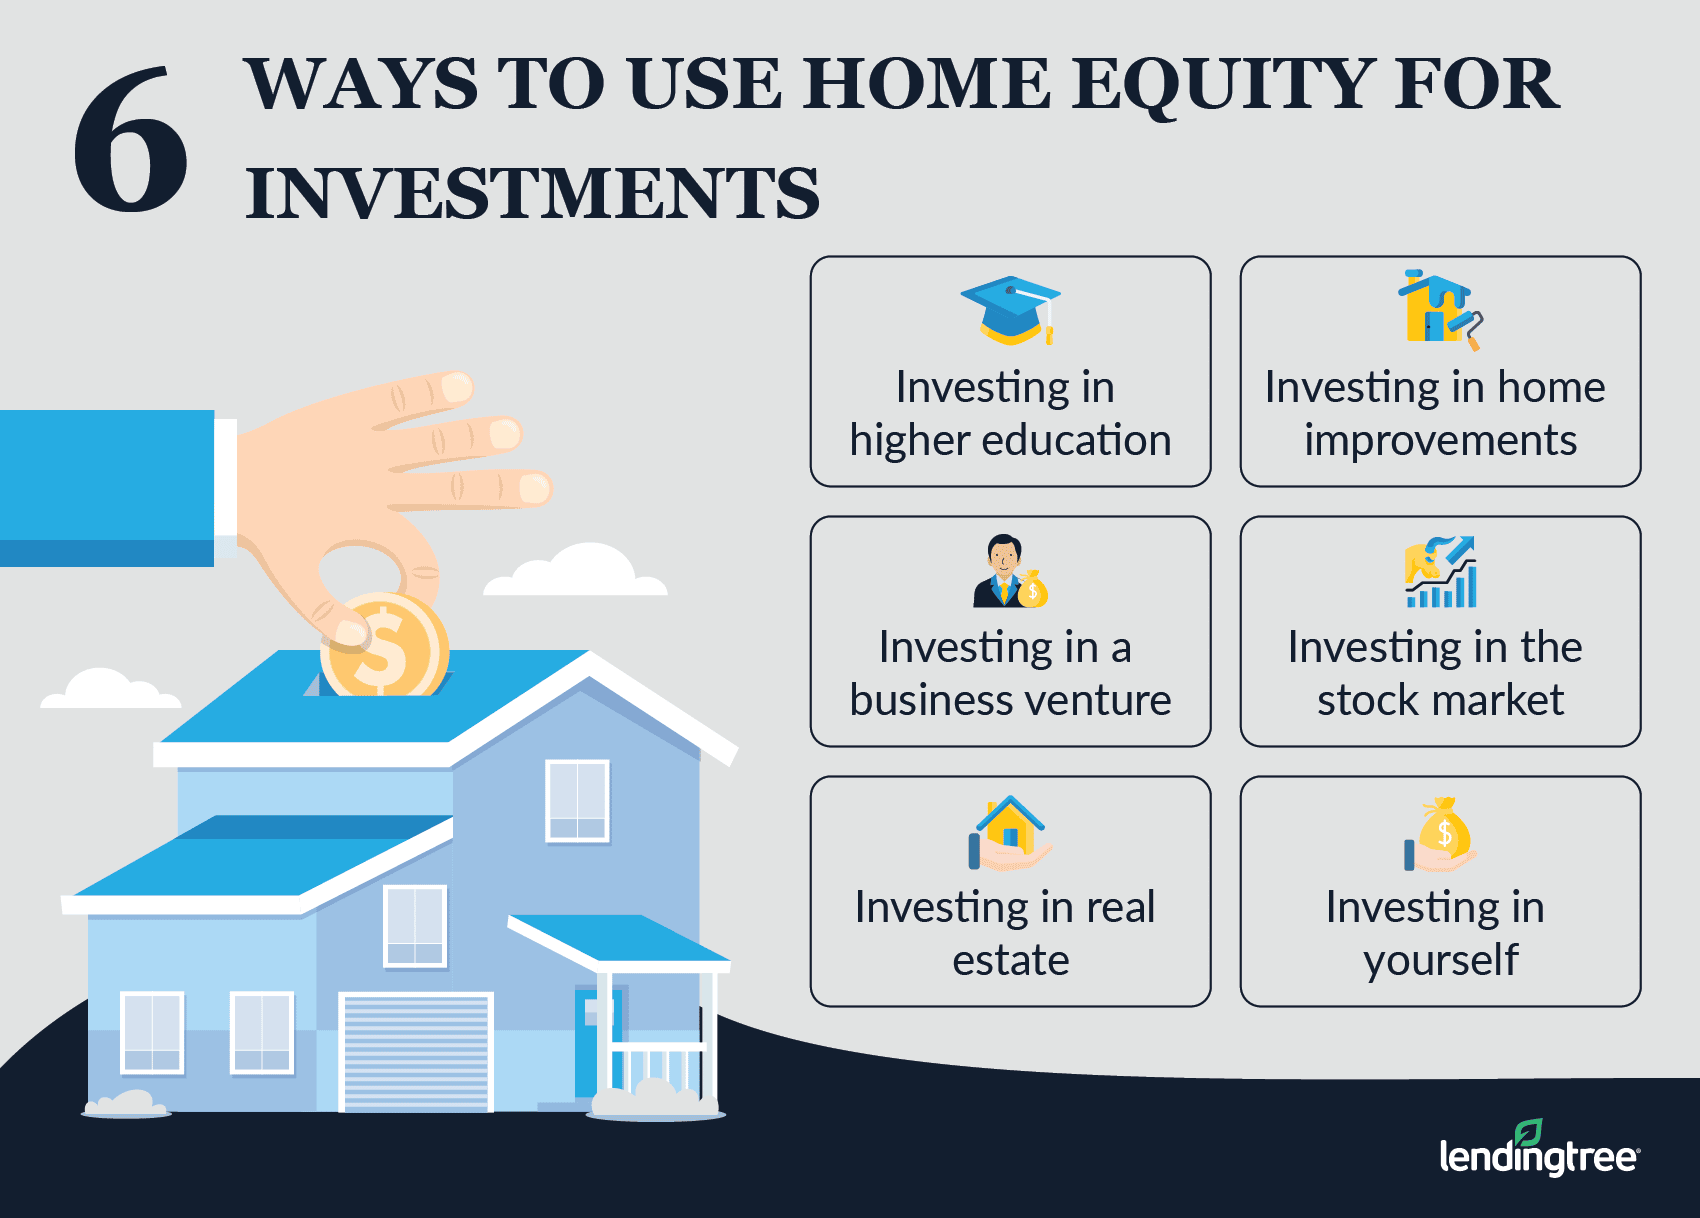 Ways to use home equity for investments include higher education, home improvements, business ventures, the stock market, other real estate, and more.